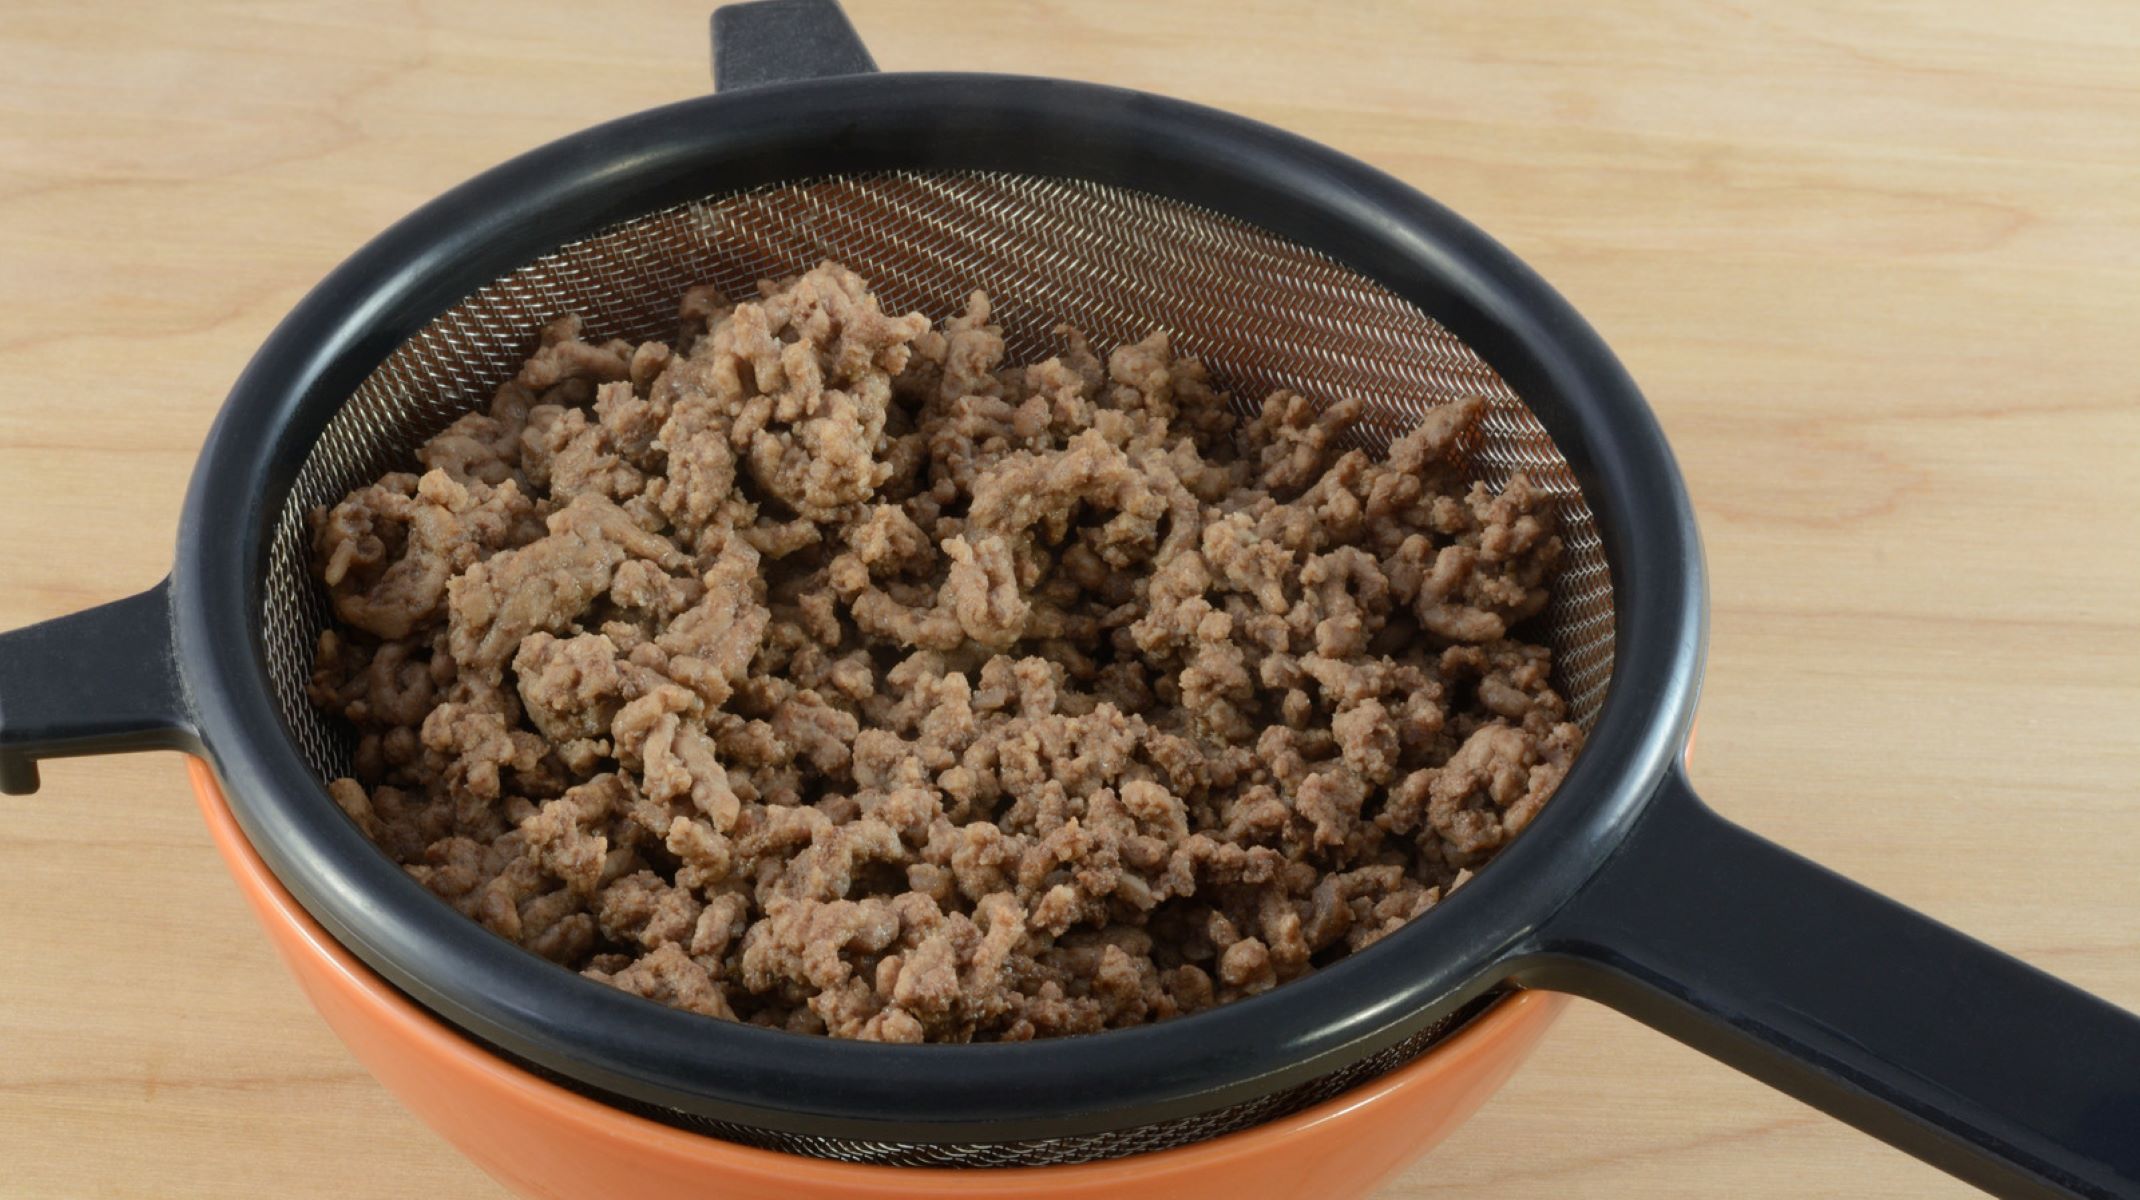 How To Strain Ground Beef Without A Strainer